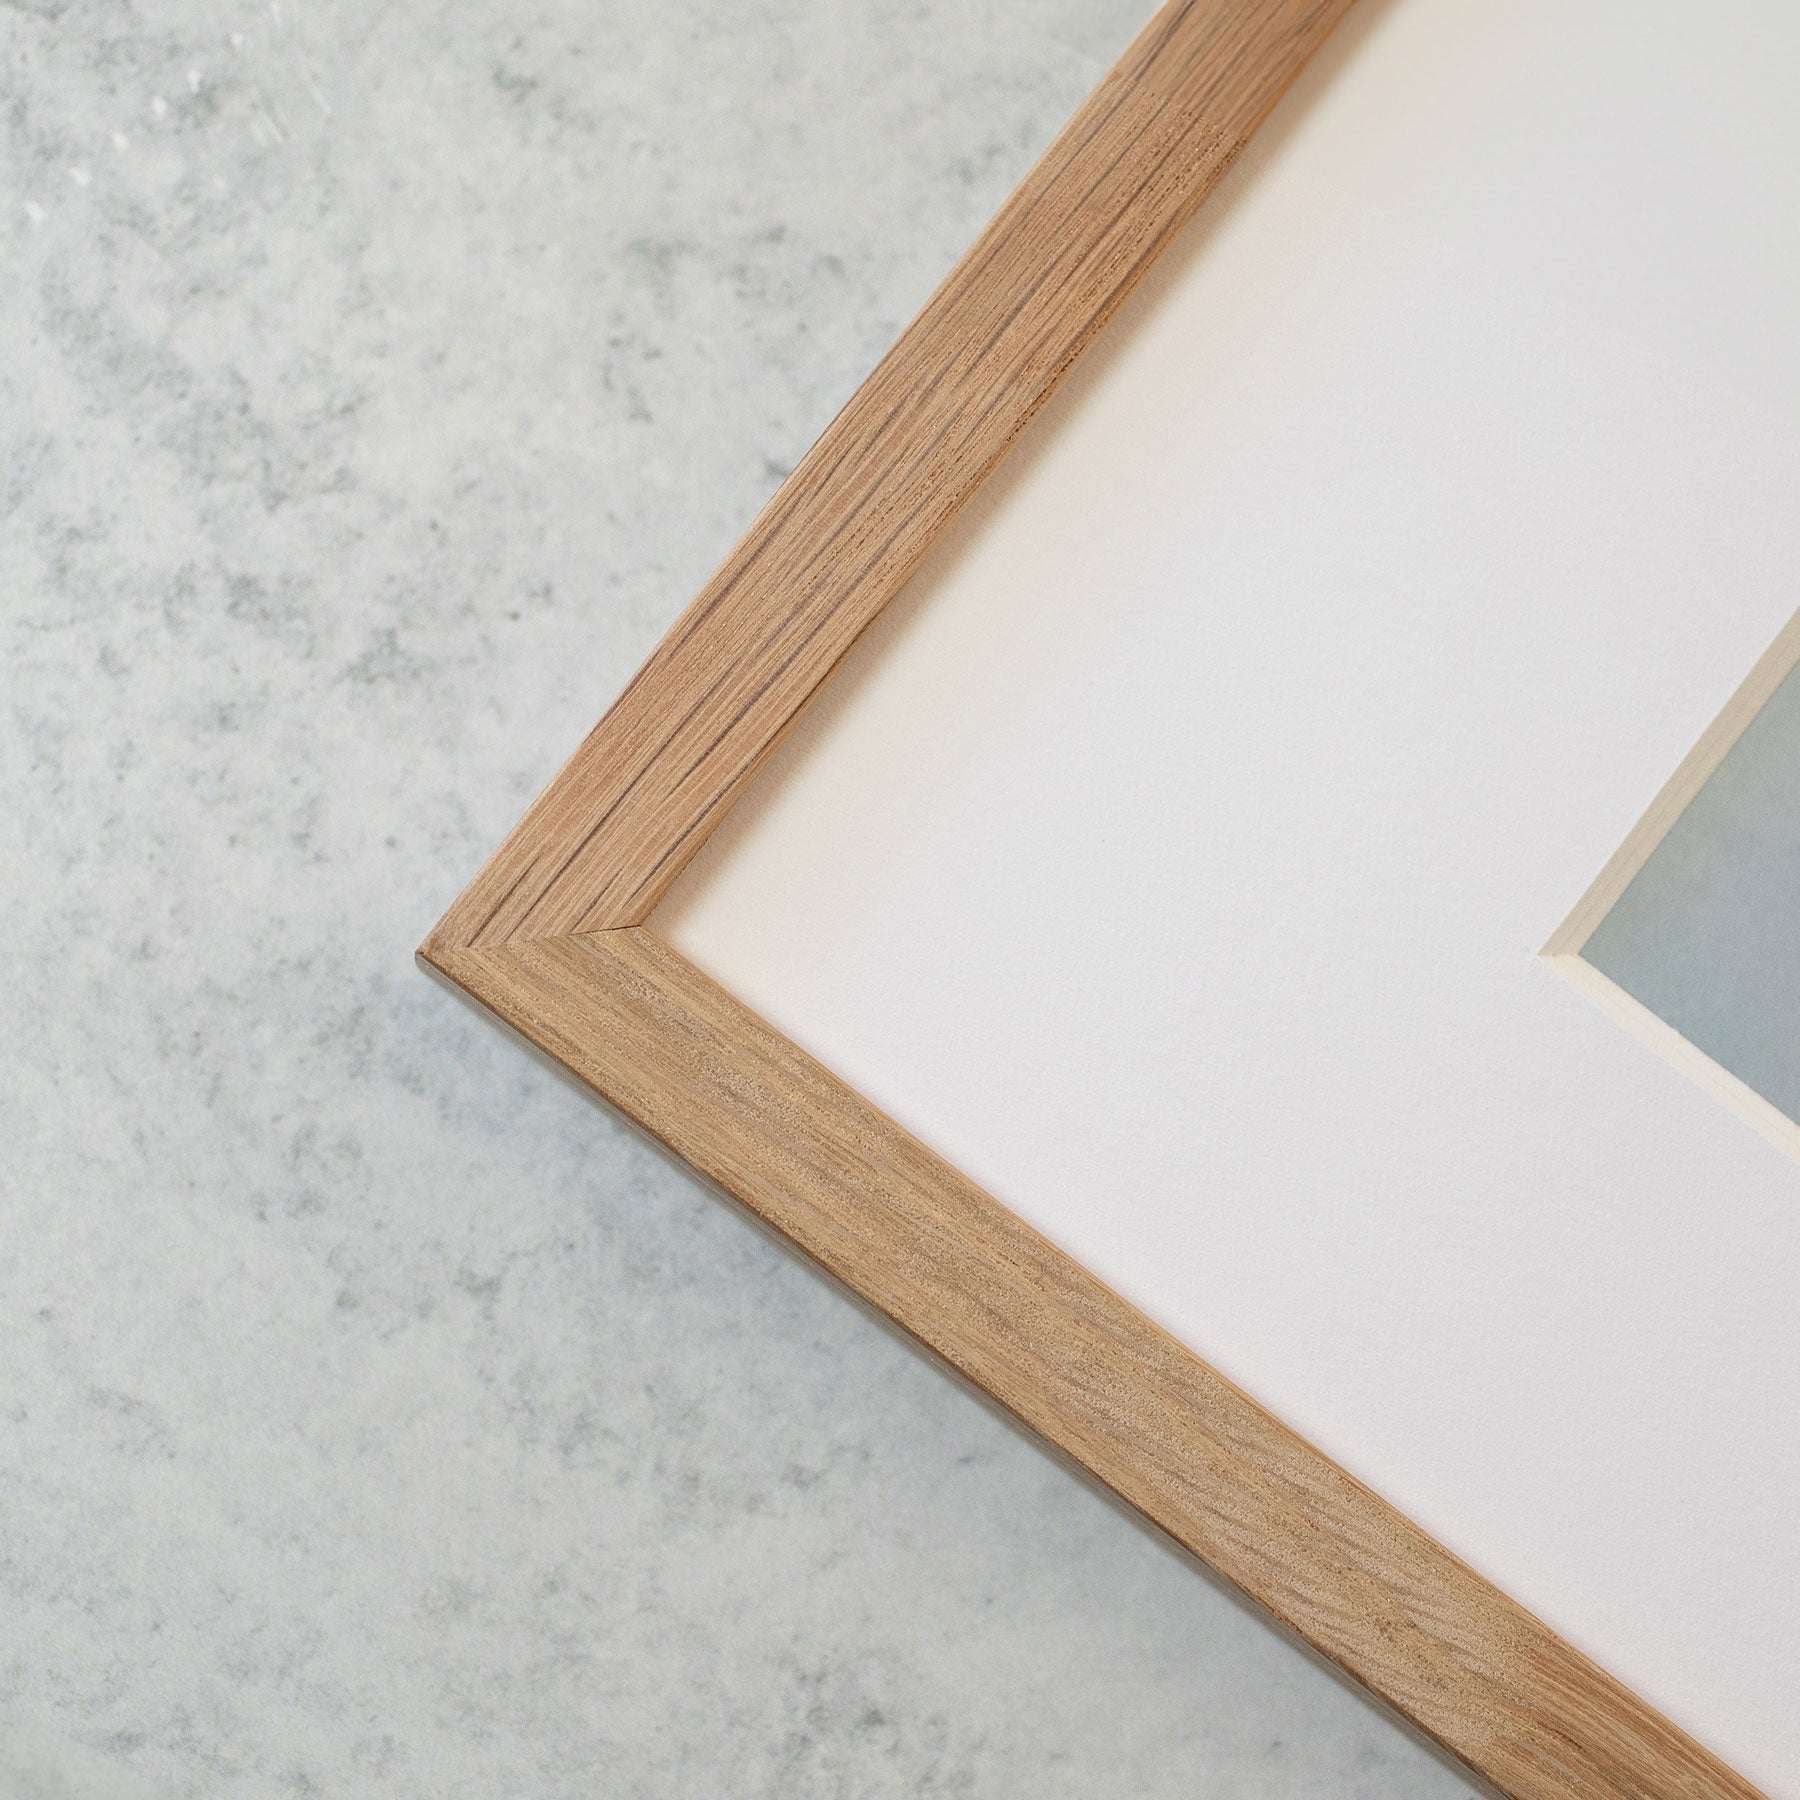 Close-up of a wooden picture frame corner placed on a marble surface. The frame is light brown with a smooth texture and contains a white matboard, perfect for showcasing the Moody Nautical Seascape Print, &#39;Sail Boats Approaching&#39; by Offley Green. The composition emphasizes the clean lines and natural materials.